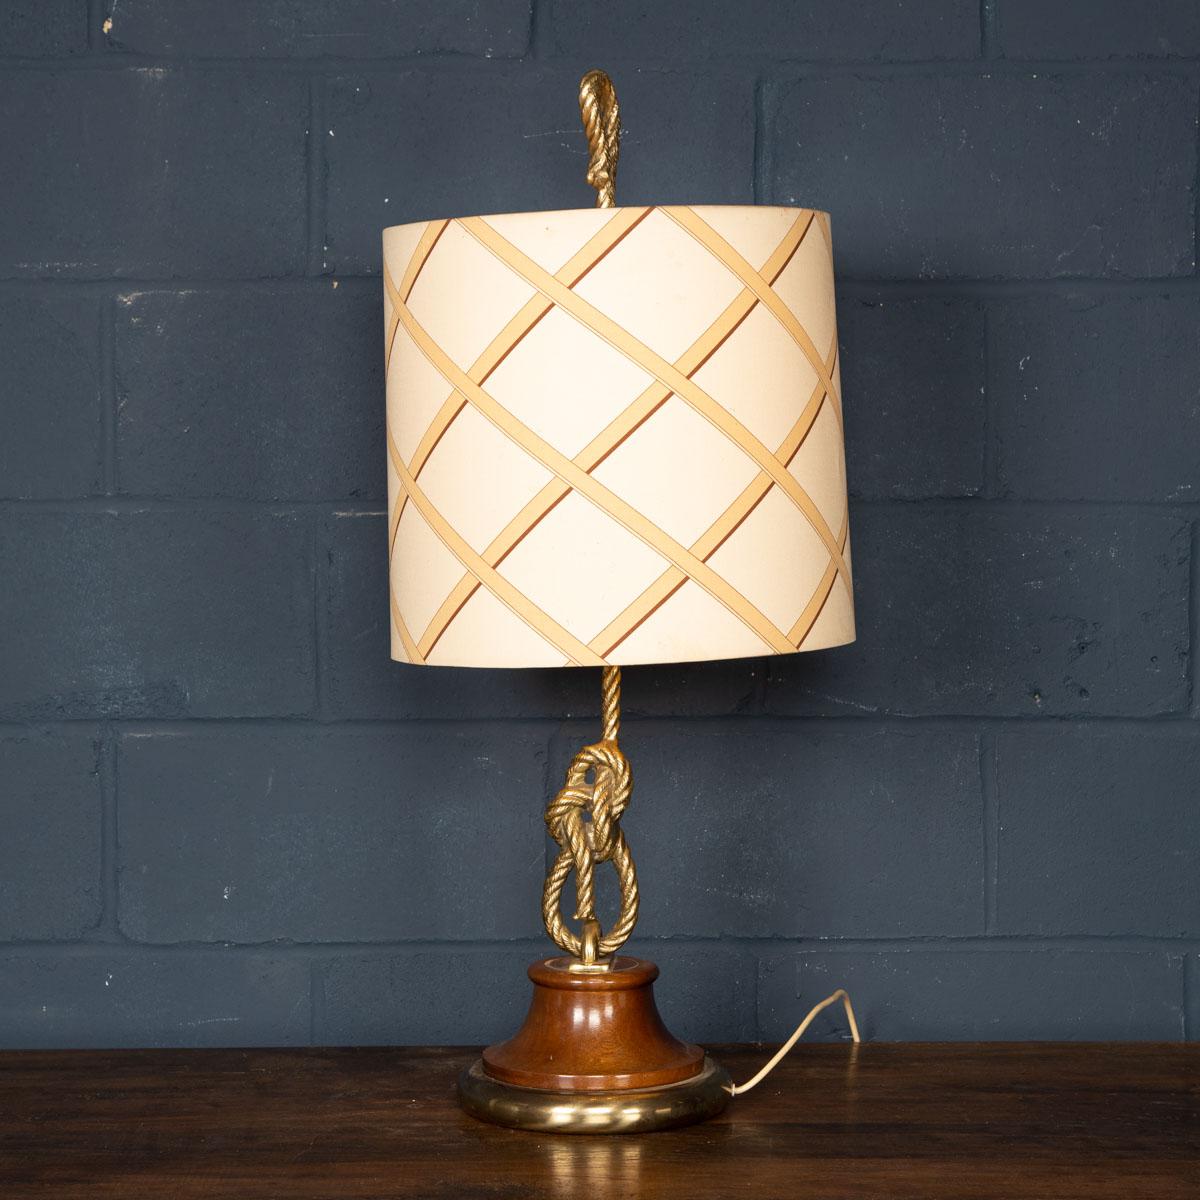 A very stylish table lamp with the original period shade. The rope motif was typical of Gucci homeware and it is increasingly rare to find them with the lamp shade as it would have been sold in the latter quarter of the 20th century. A wonderful